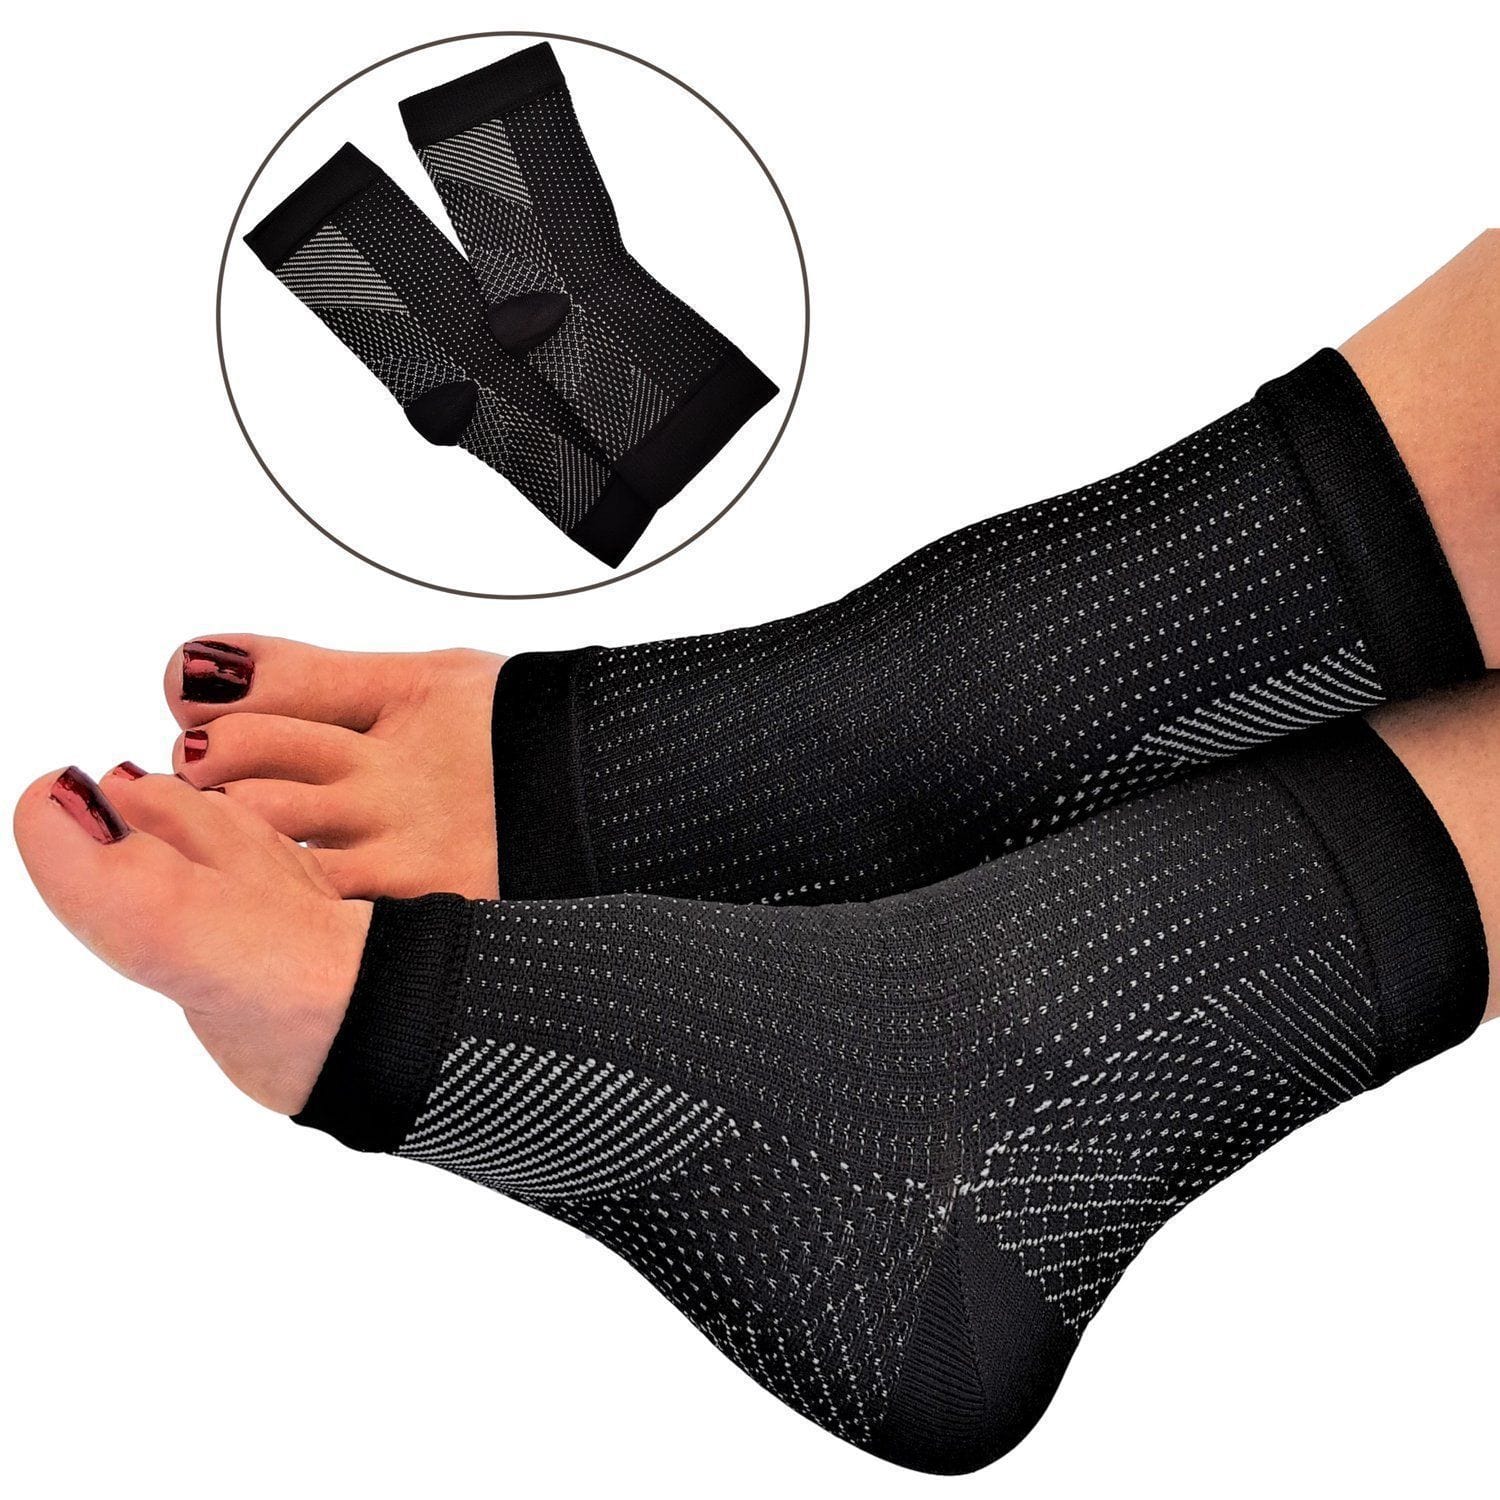 Compression Foot Sleeve (1-Pack)